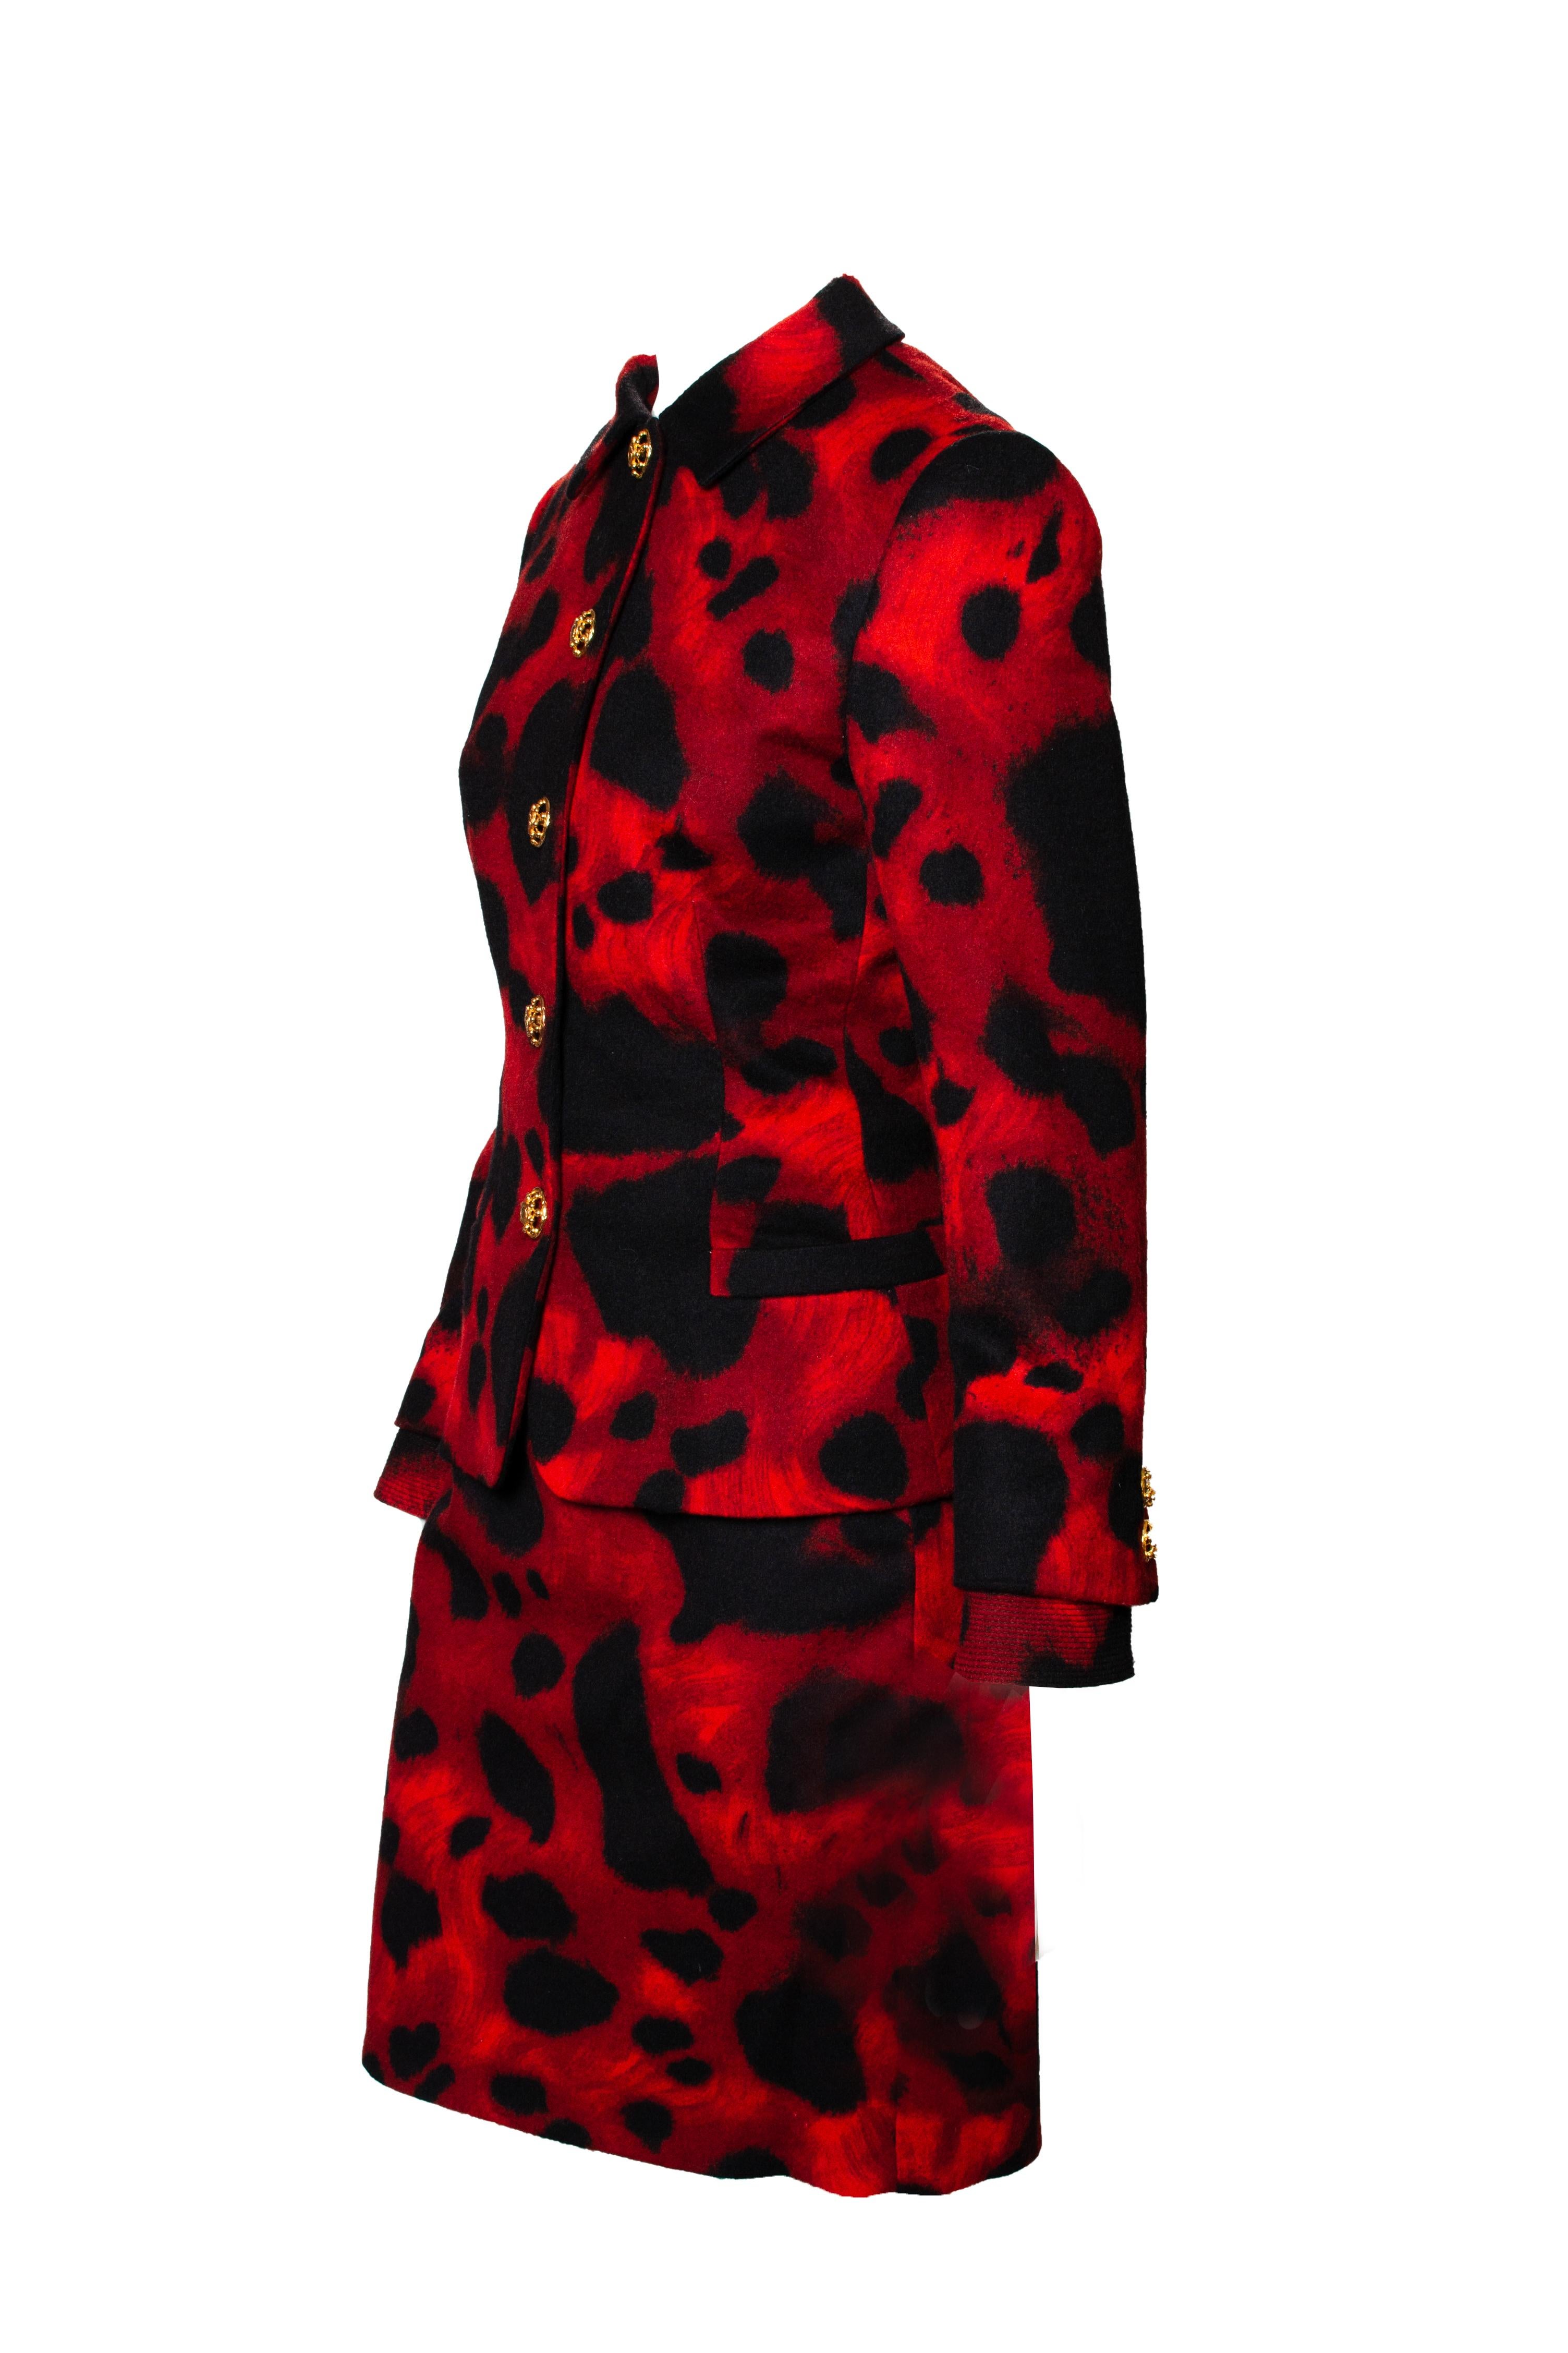 Presenting This classic red leopard print skirt suit is from Gianni Versace's Fall/Winter 1992 collection, designed by Gianni Versace. If this isn't a power suit, we are not sure we know what is. This set features a vibrant suit jacket with a